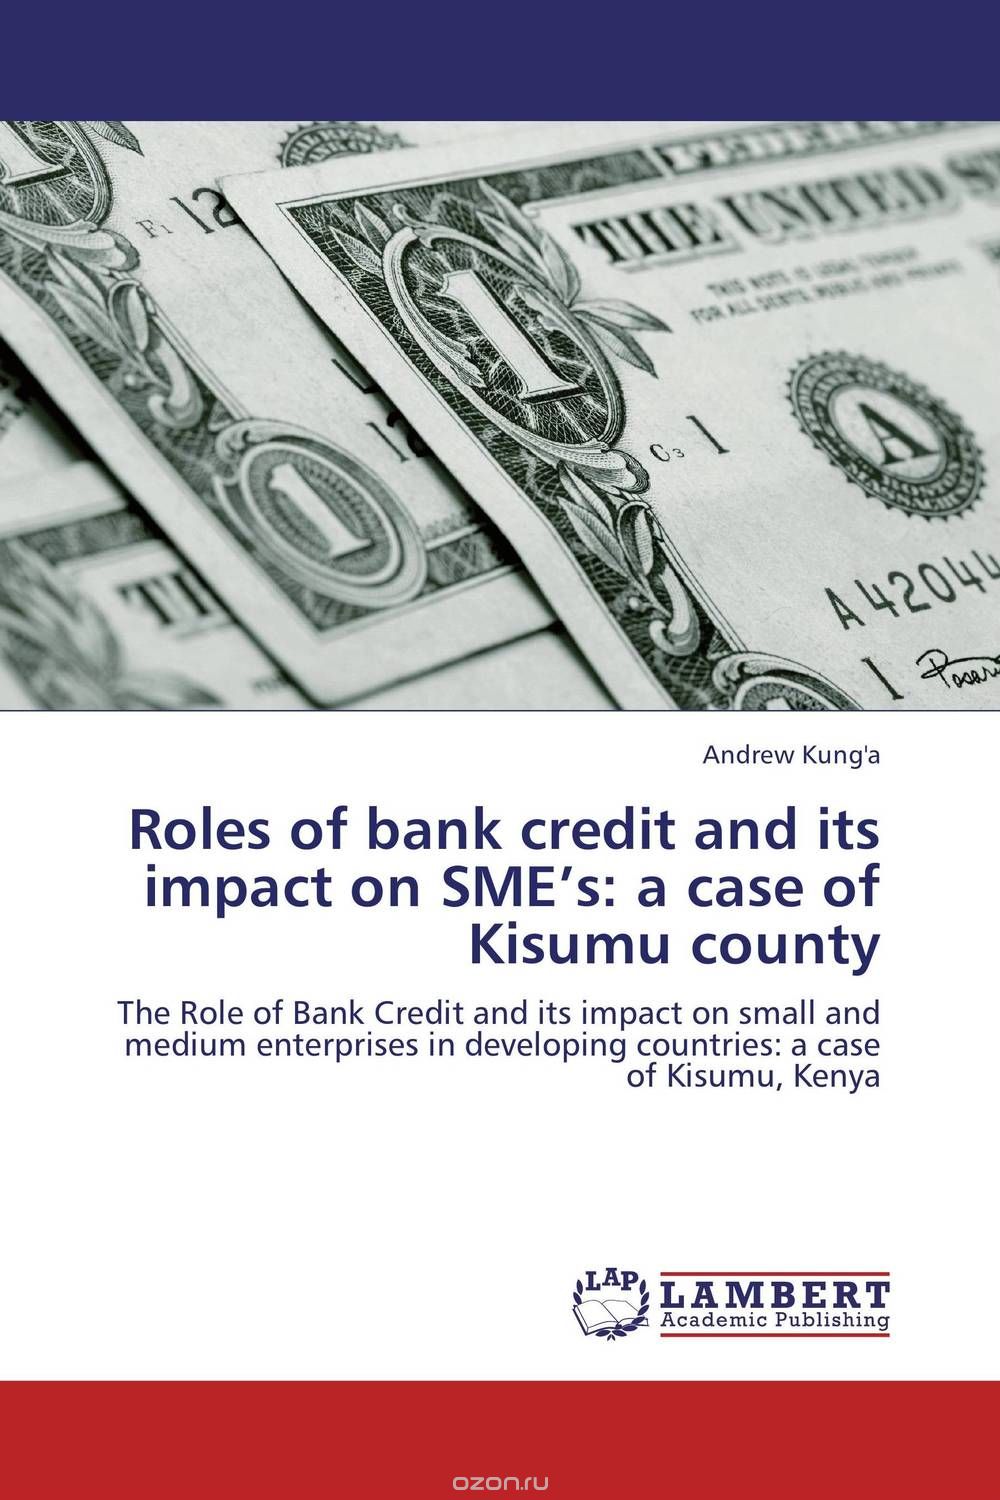 Roles of bank credit and its impact on SME’s: a case of Kisumu county